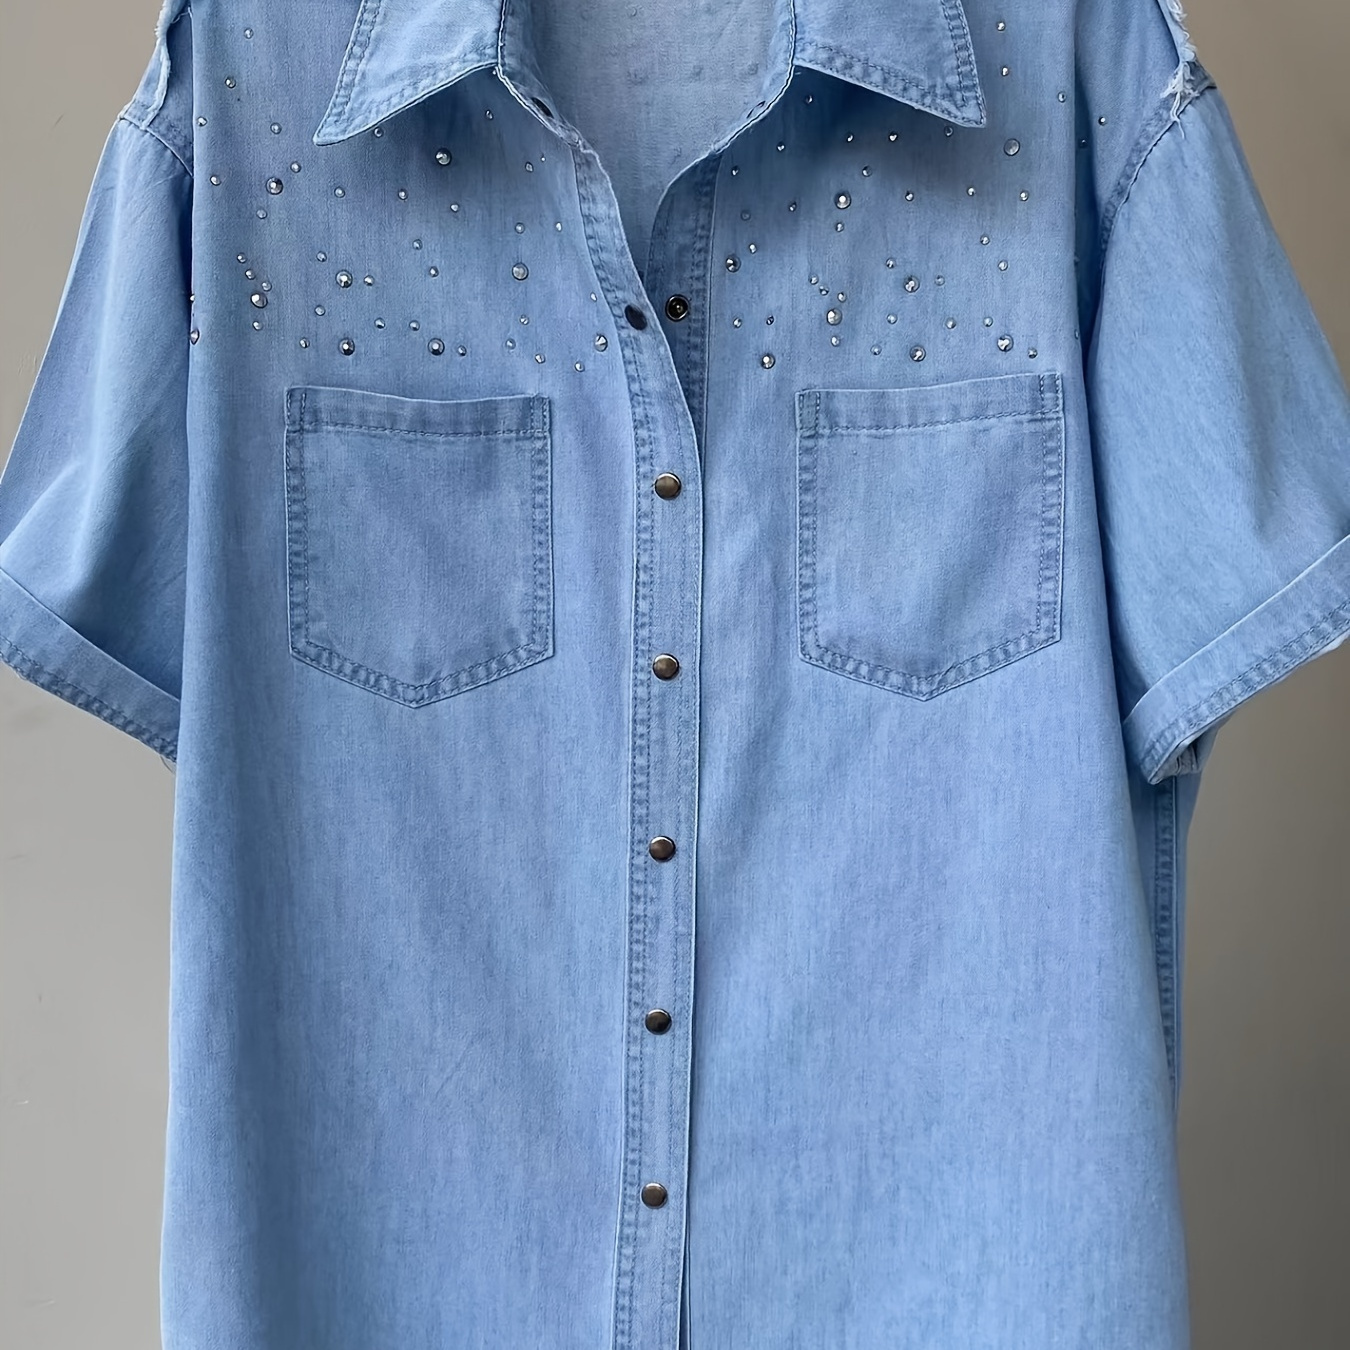 

Women's Plus Size Rhinestone Embellished Denim Shirt, Street Style, Short Sleeves, Relaxed Fit, Casual Chic Top With Button Down Closure